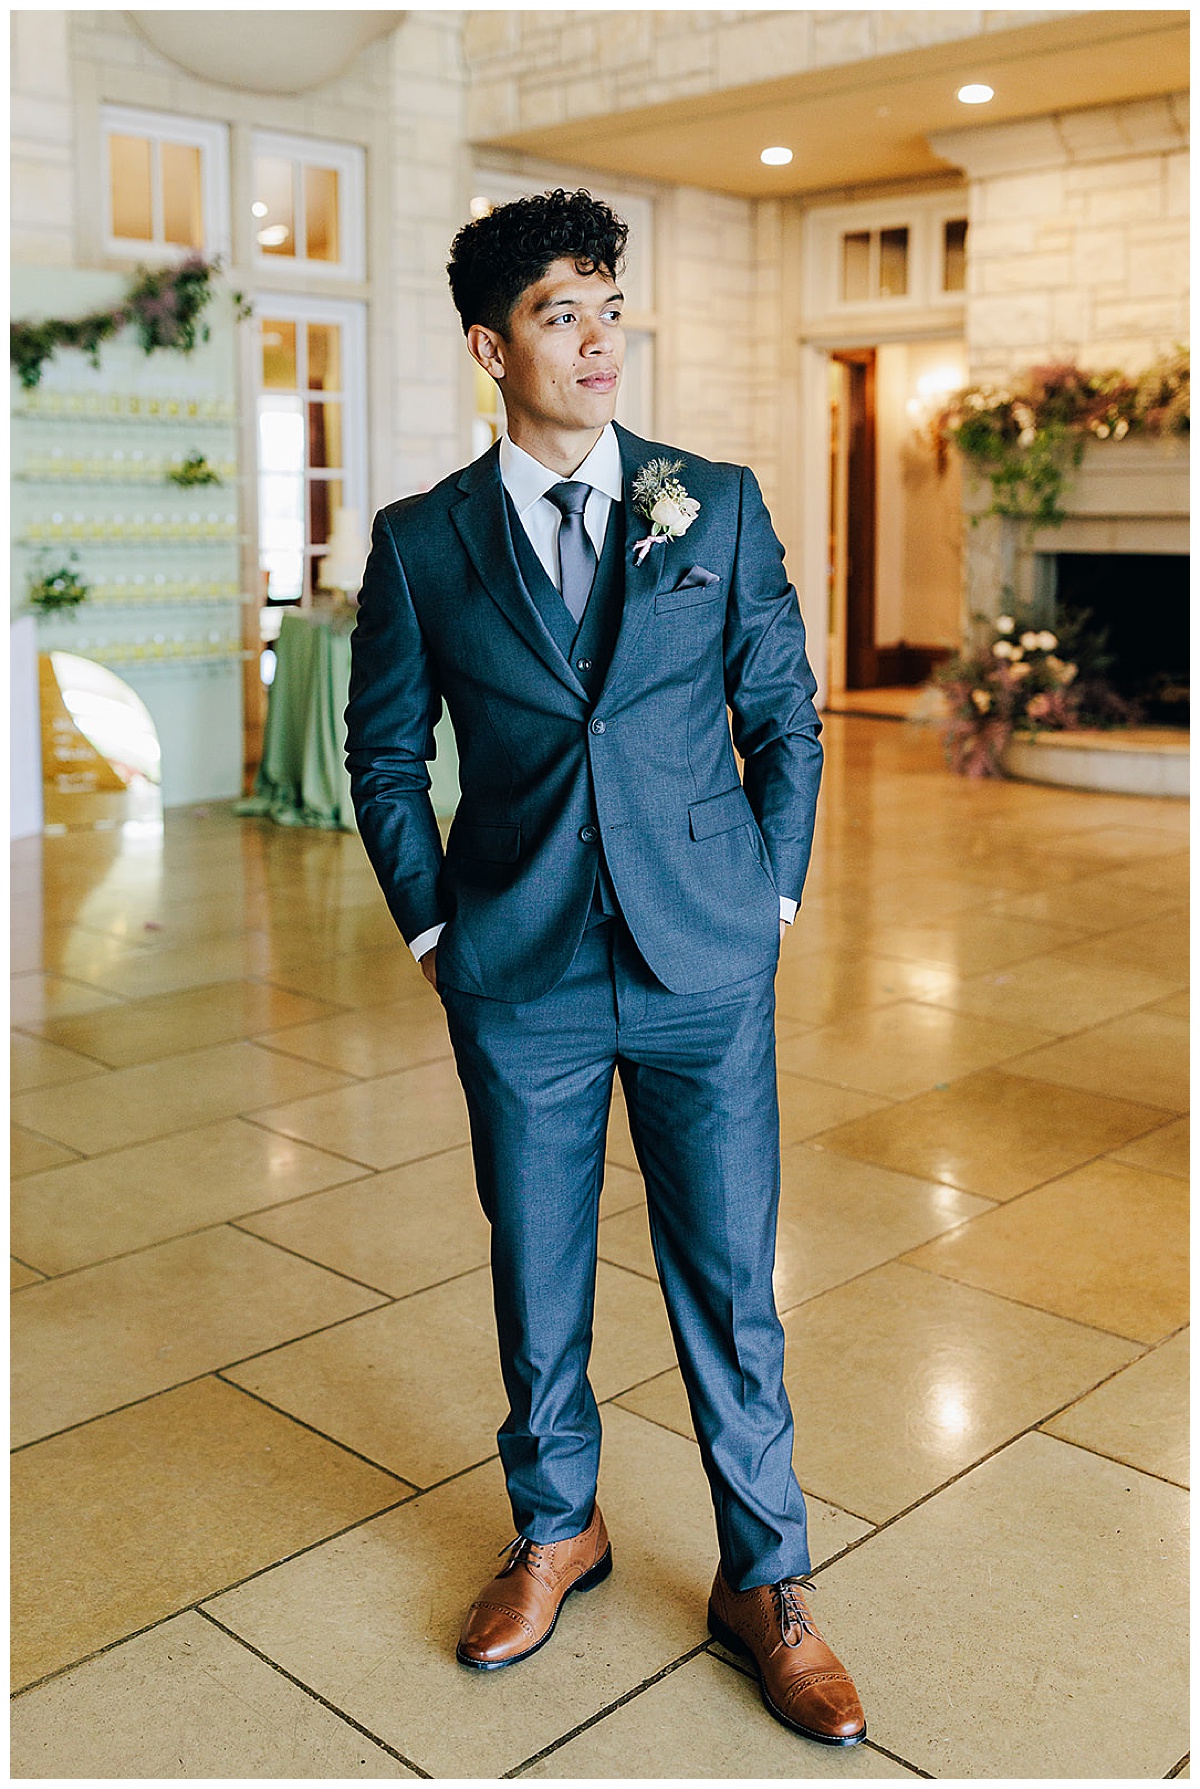 Don't forget to Back Up & Store Your Wedding Photos of your husband standing in his blue suit